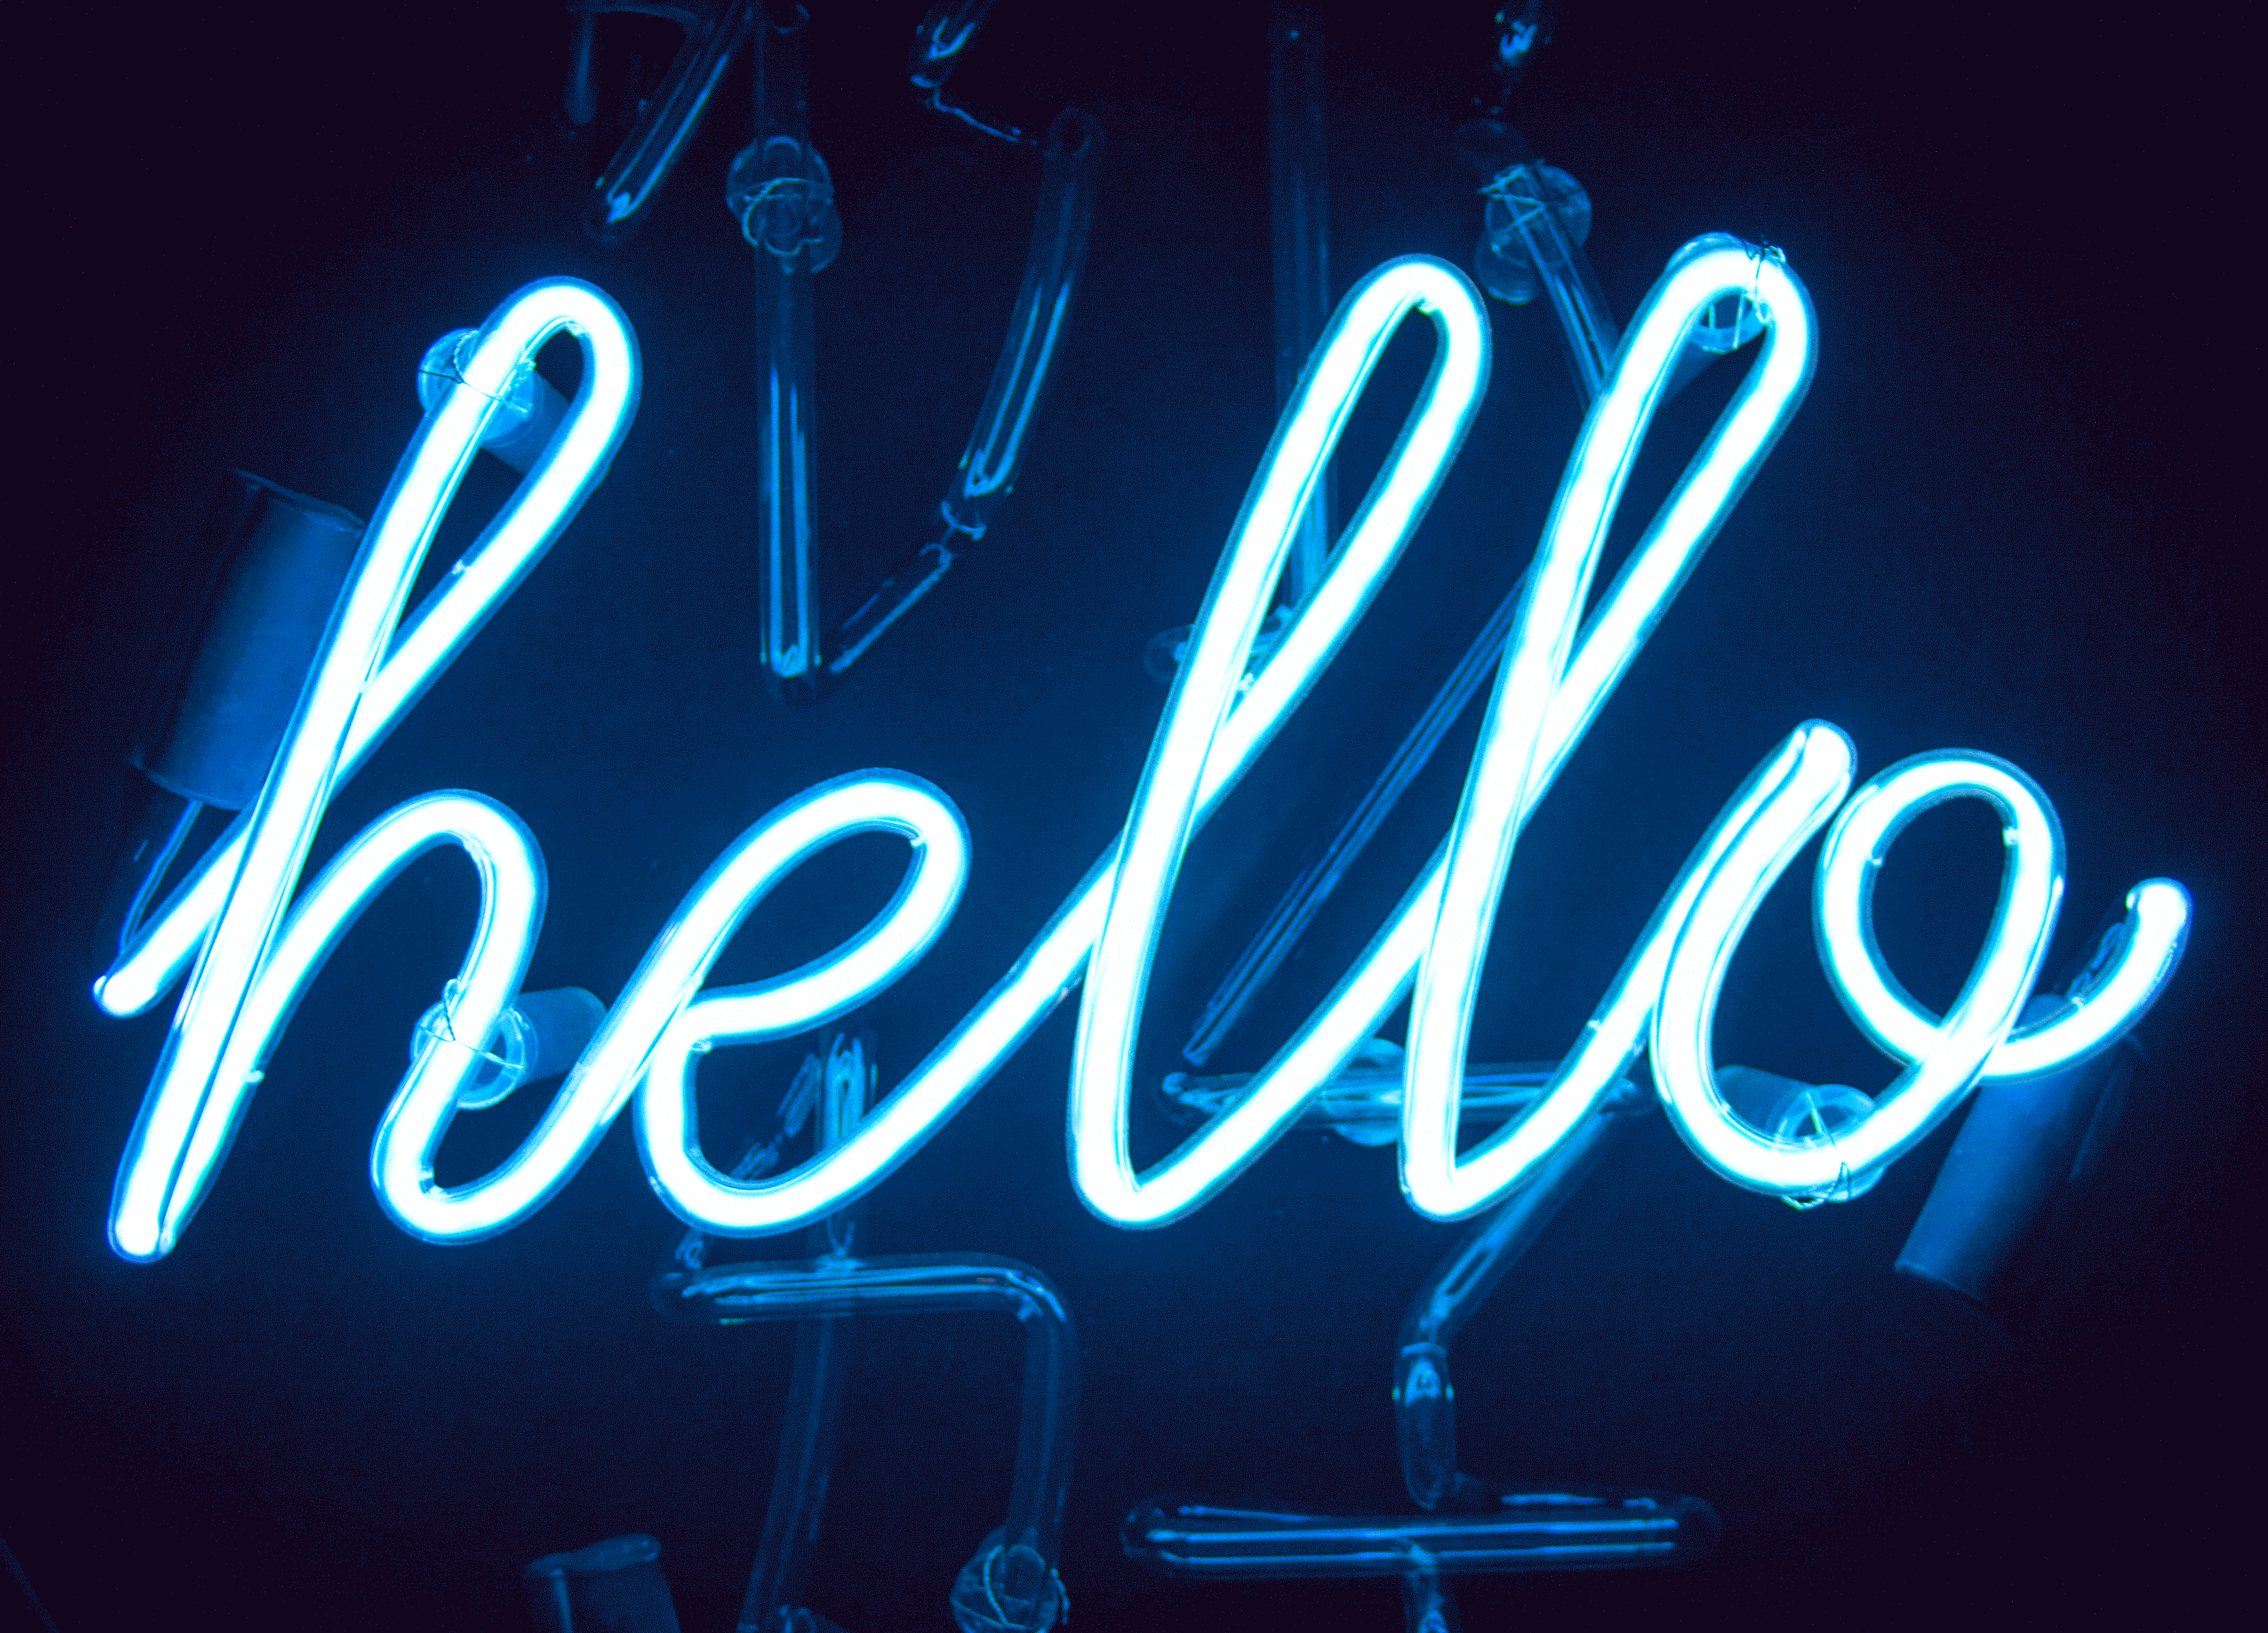 What are electric blue neon blue aesthetic signs?